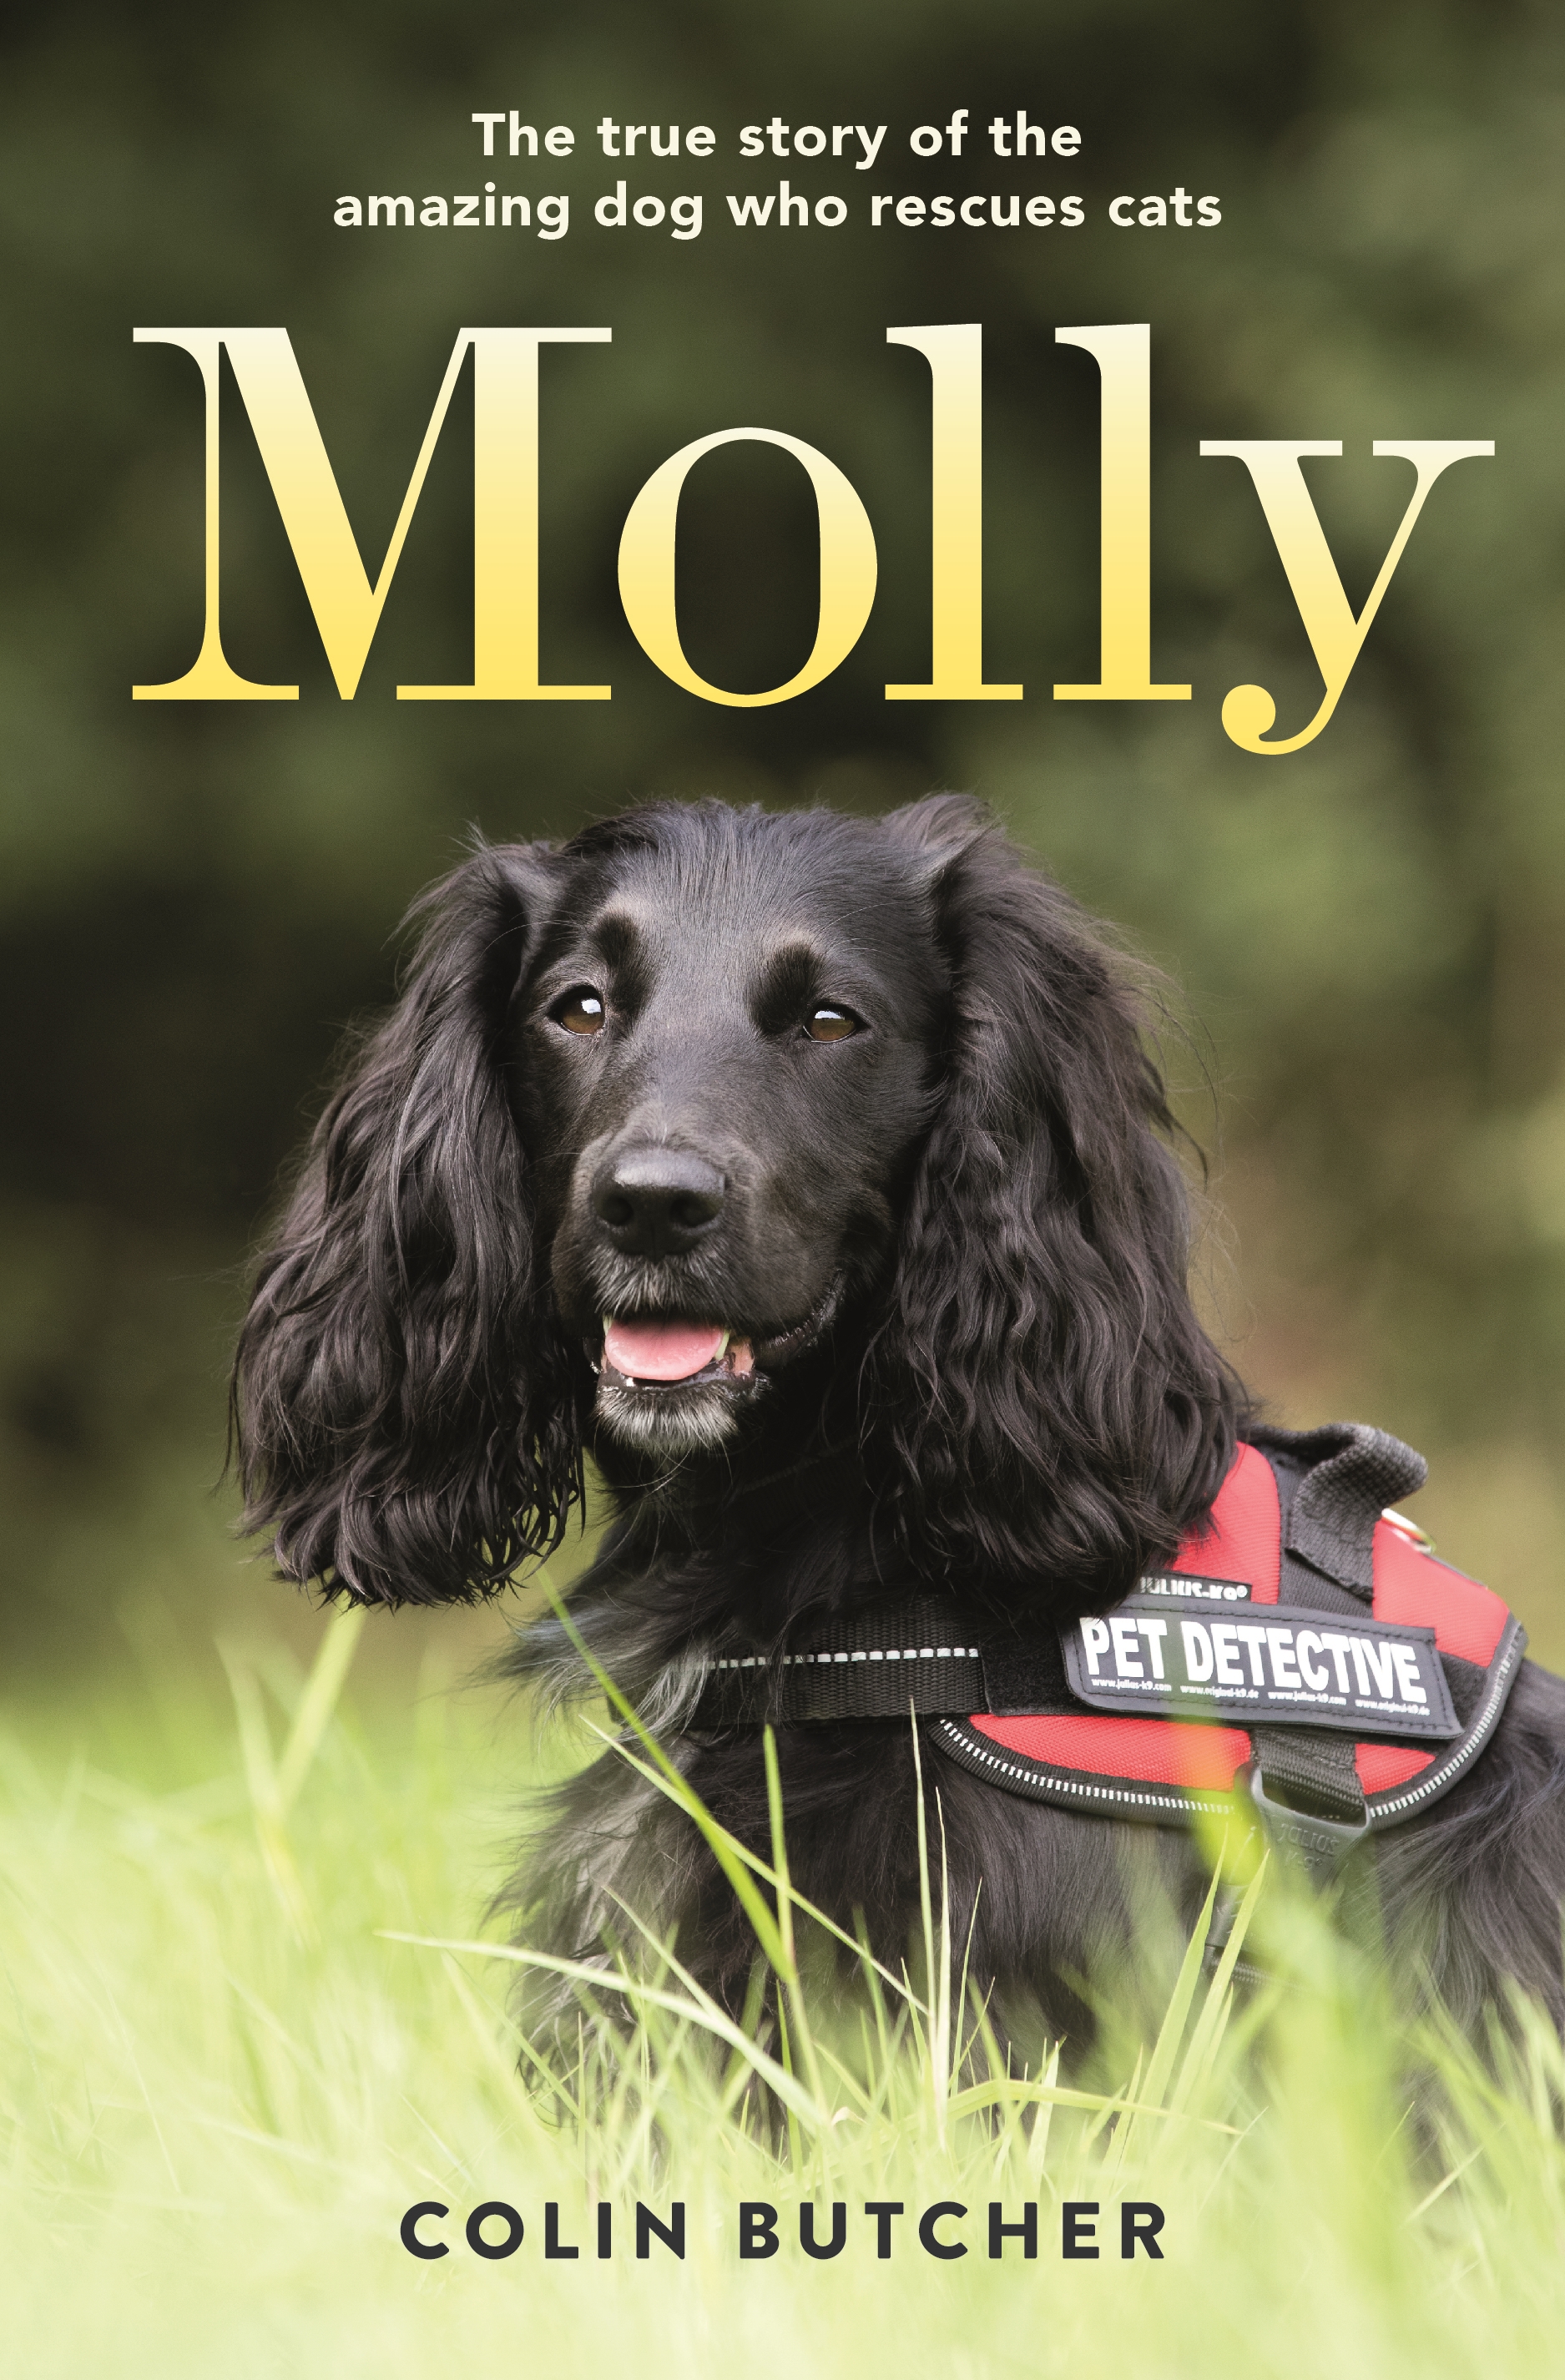 A black dog wearing a red "pet detective" harness sits attentively amidst lush green grass, featured on the cover of a book titled "molly - the true story of the amazing dog who rescues cats" by colin butcher.